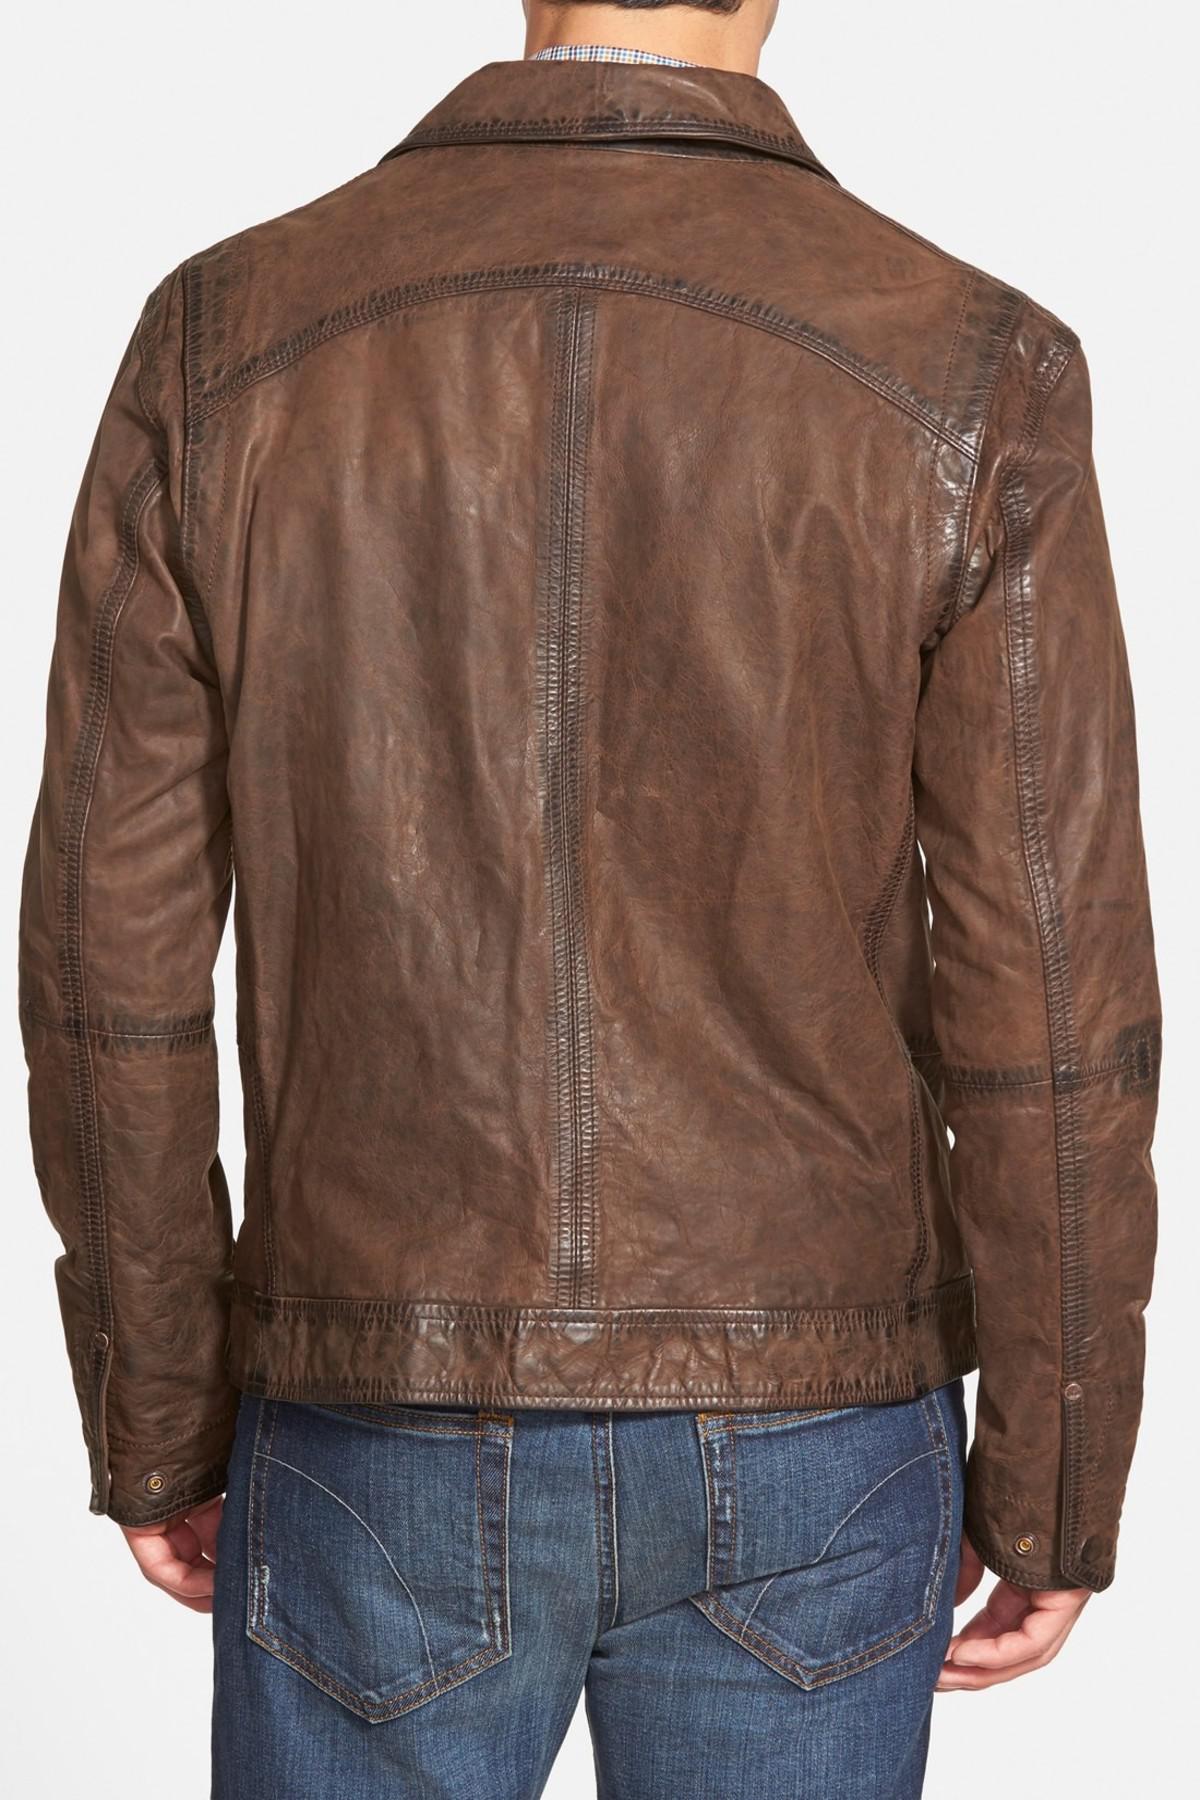 Timberland 'tenon' Leather Jacket in Cocoa (Brown) for Men - Lyst